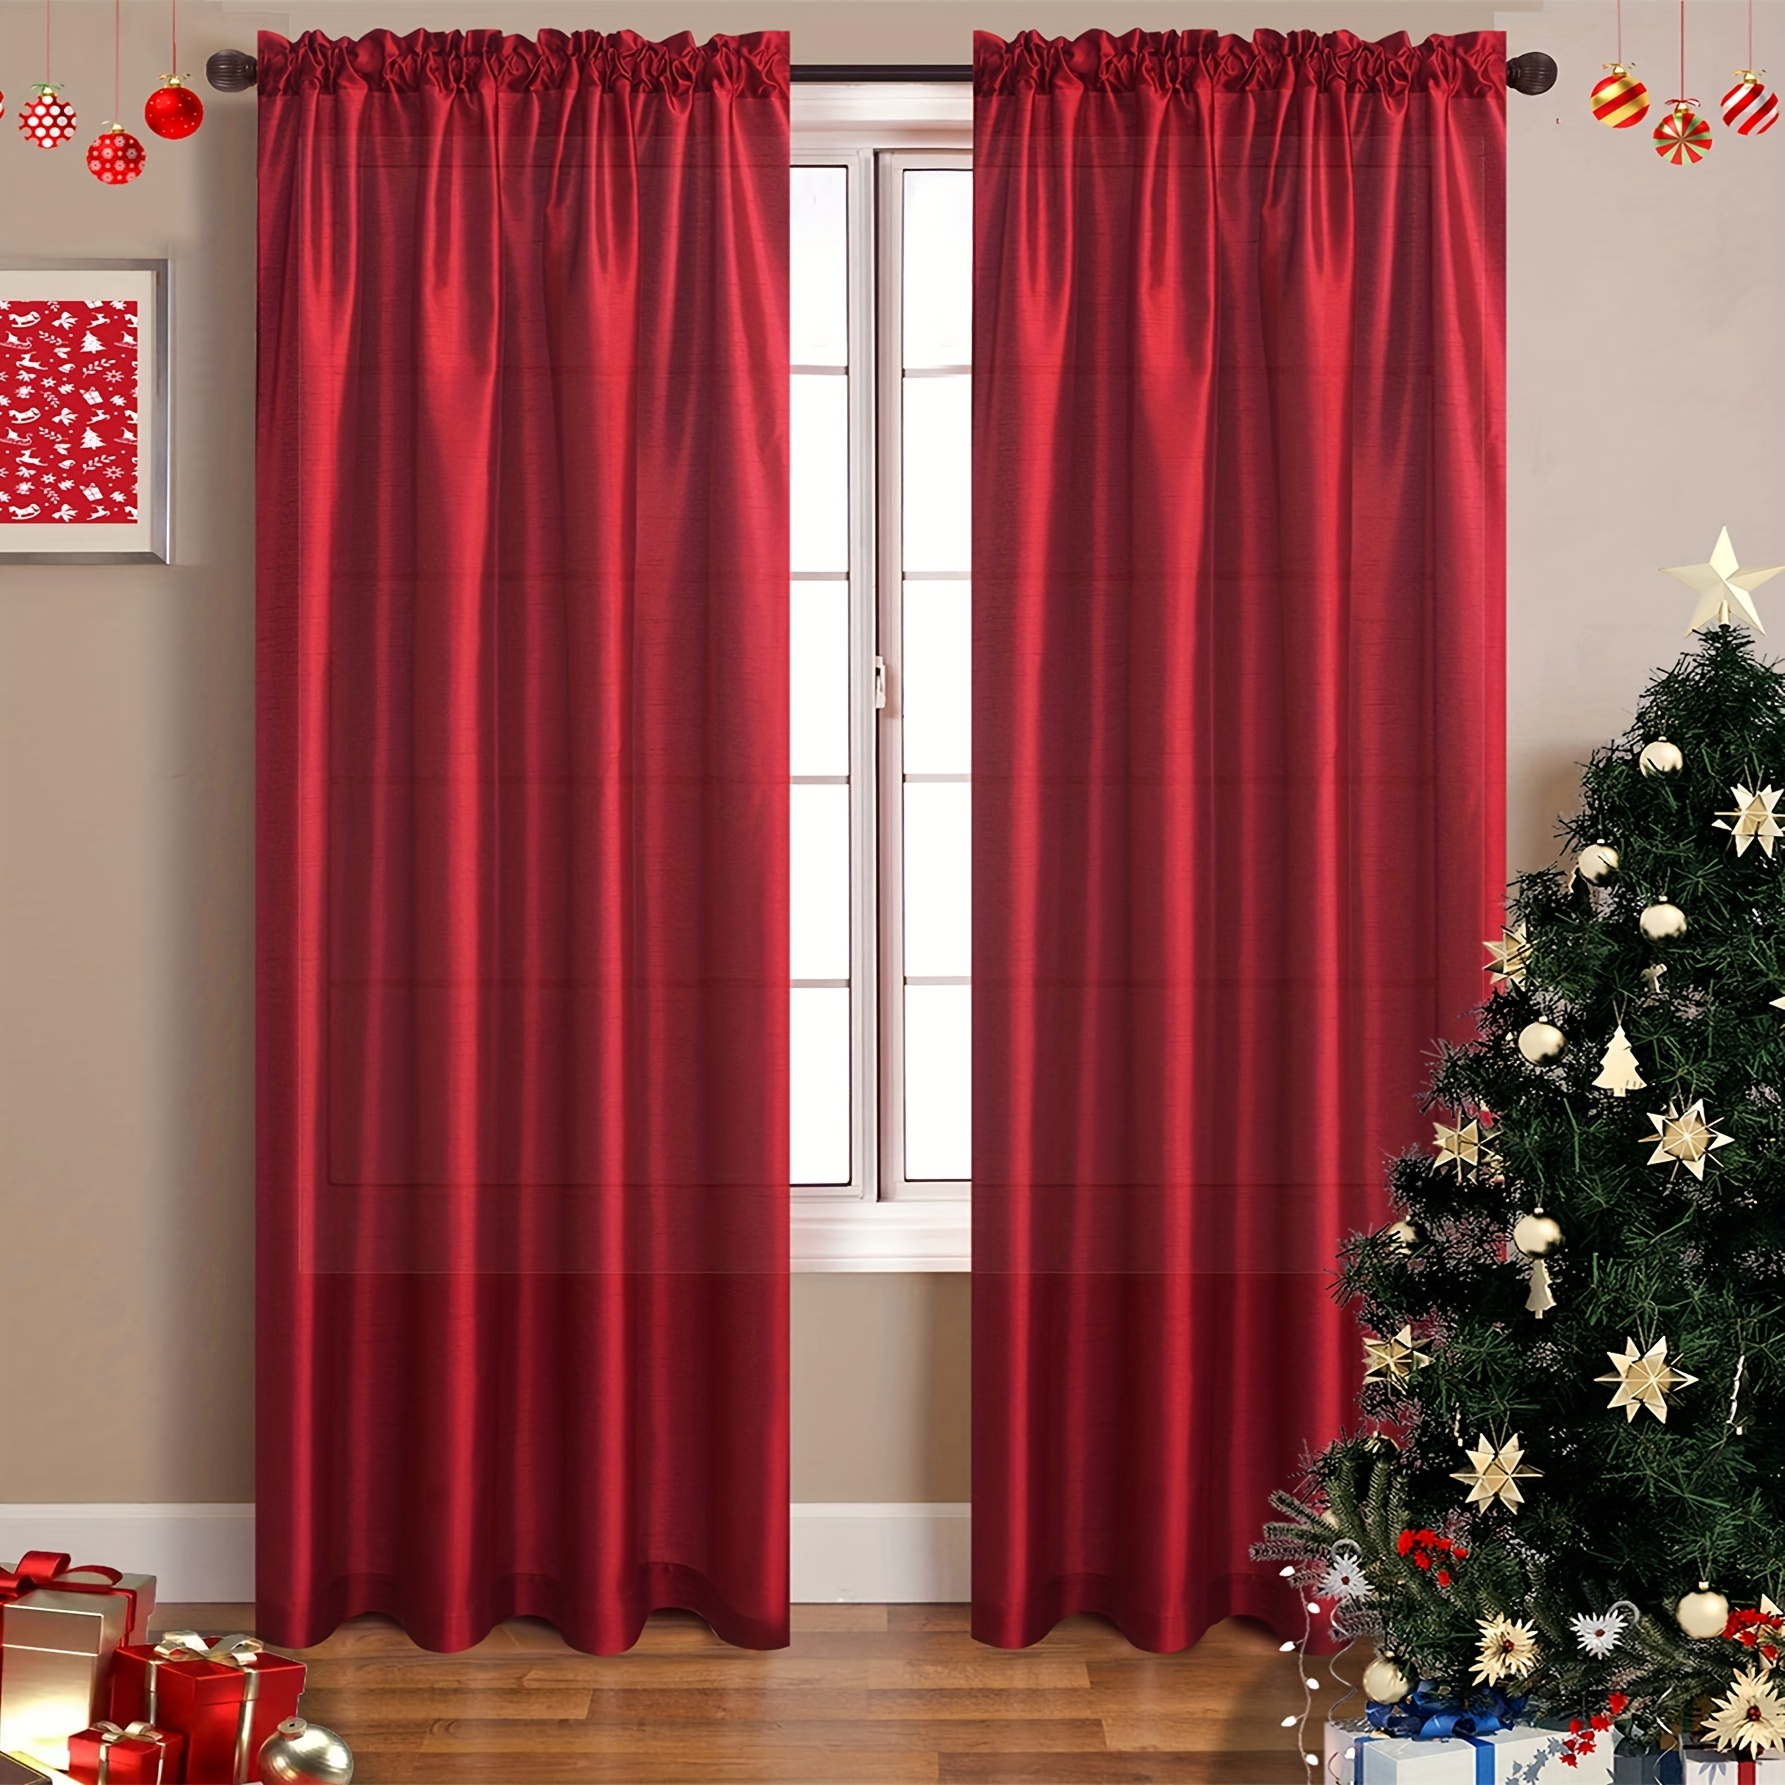 

1pc Christmas Red Decoration Indoor Faux Silk Room Darkening Curtains Solid Color Window Treatment Thermal Insulated Rod Pocket Window Drapes For Bedroom Office Kitchen Living Room Study Home Decor